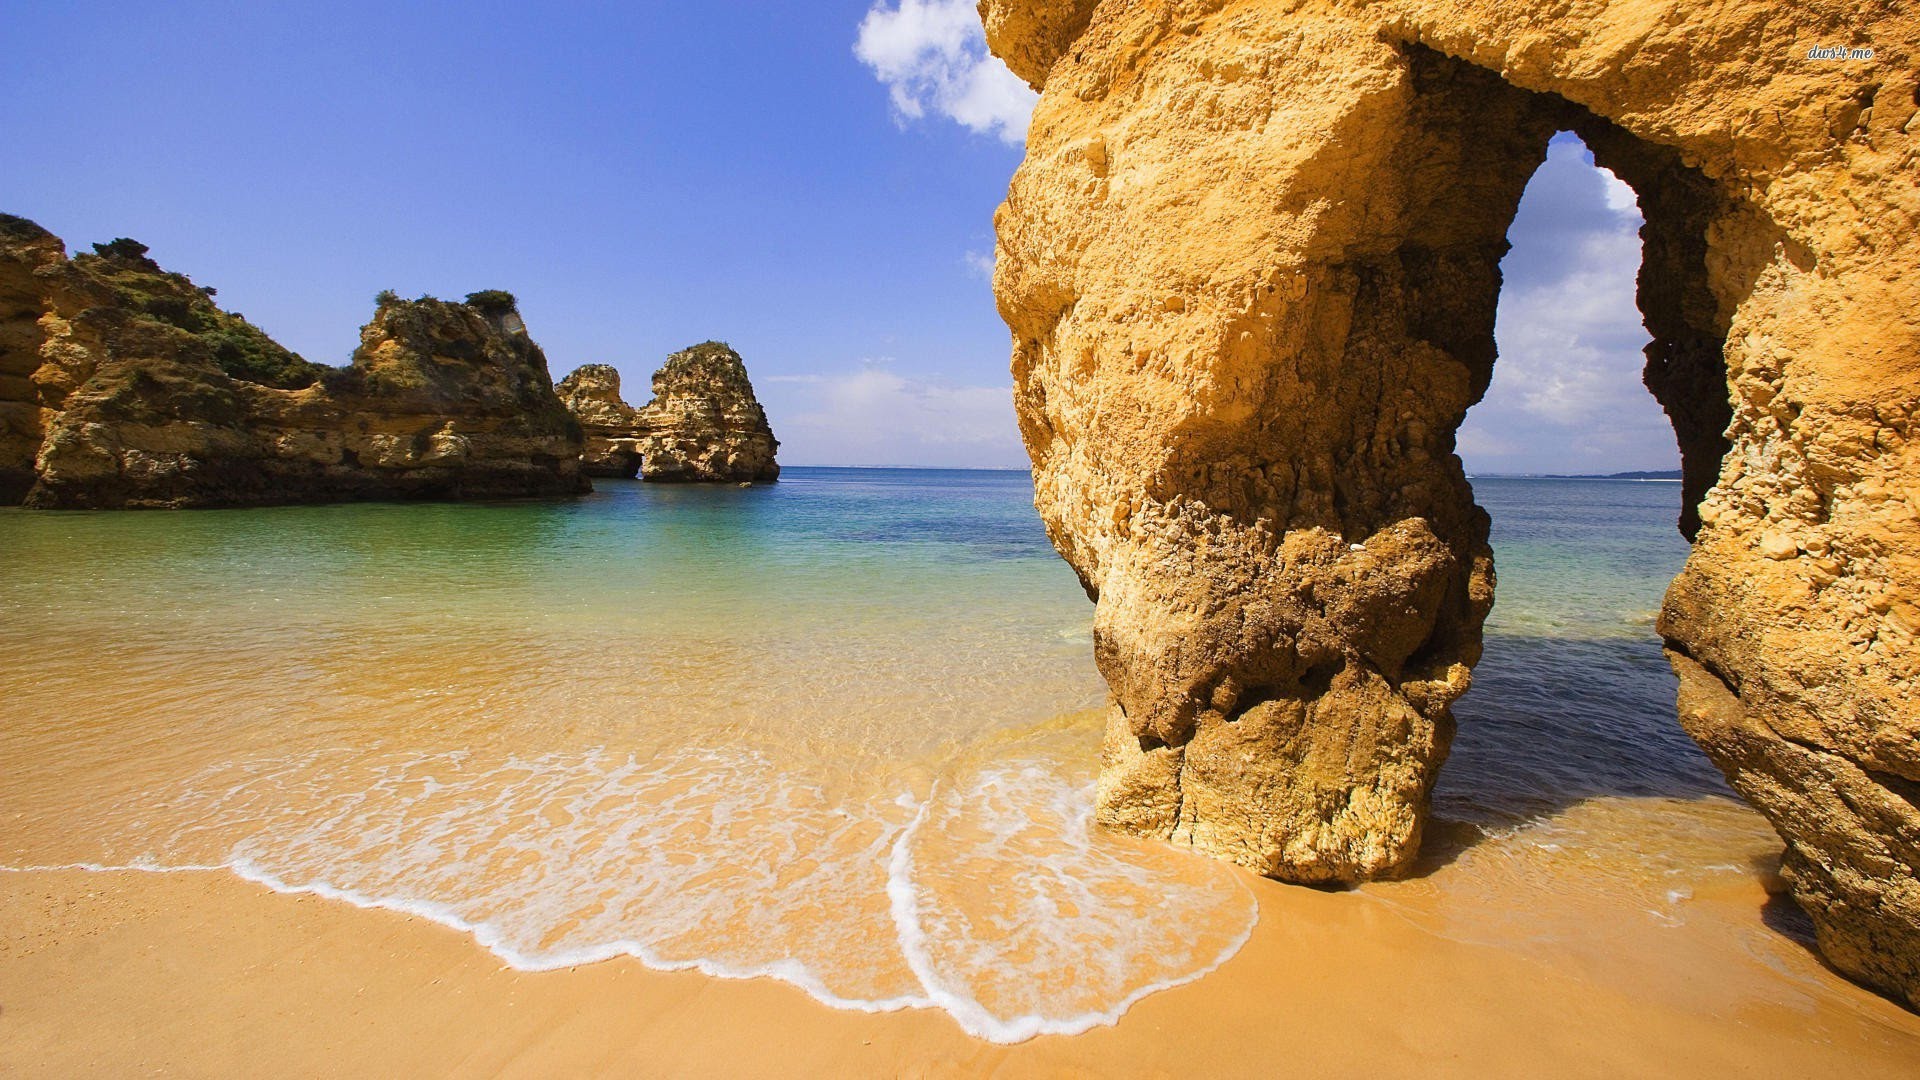 How To Get Last Minute Travel To Algarve, Portugal